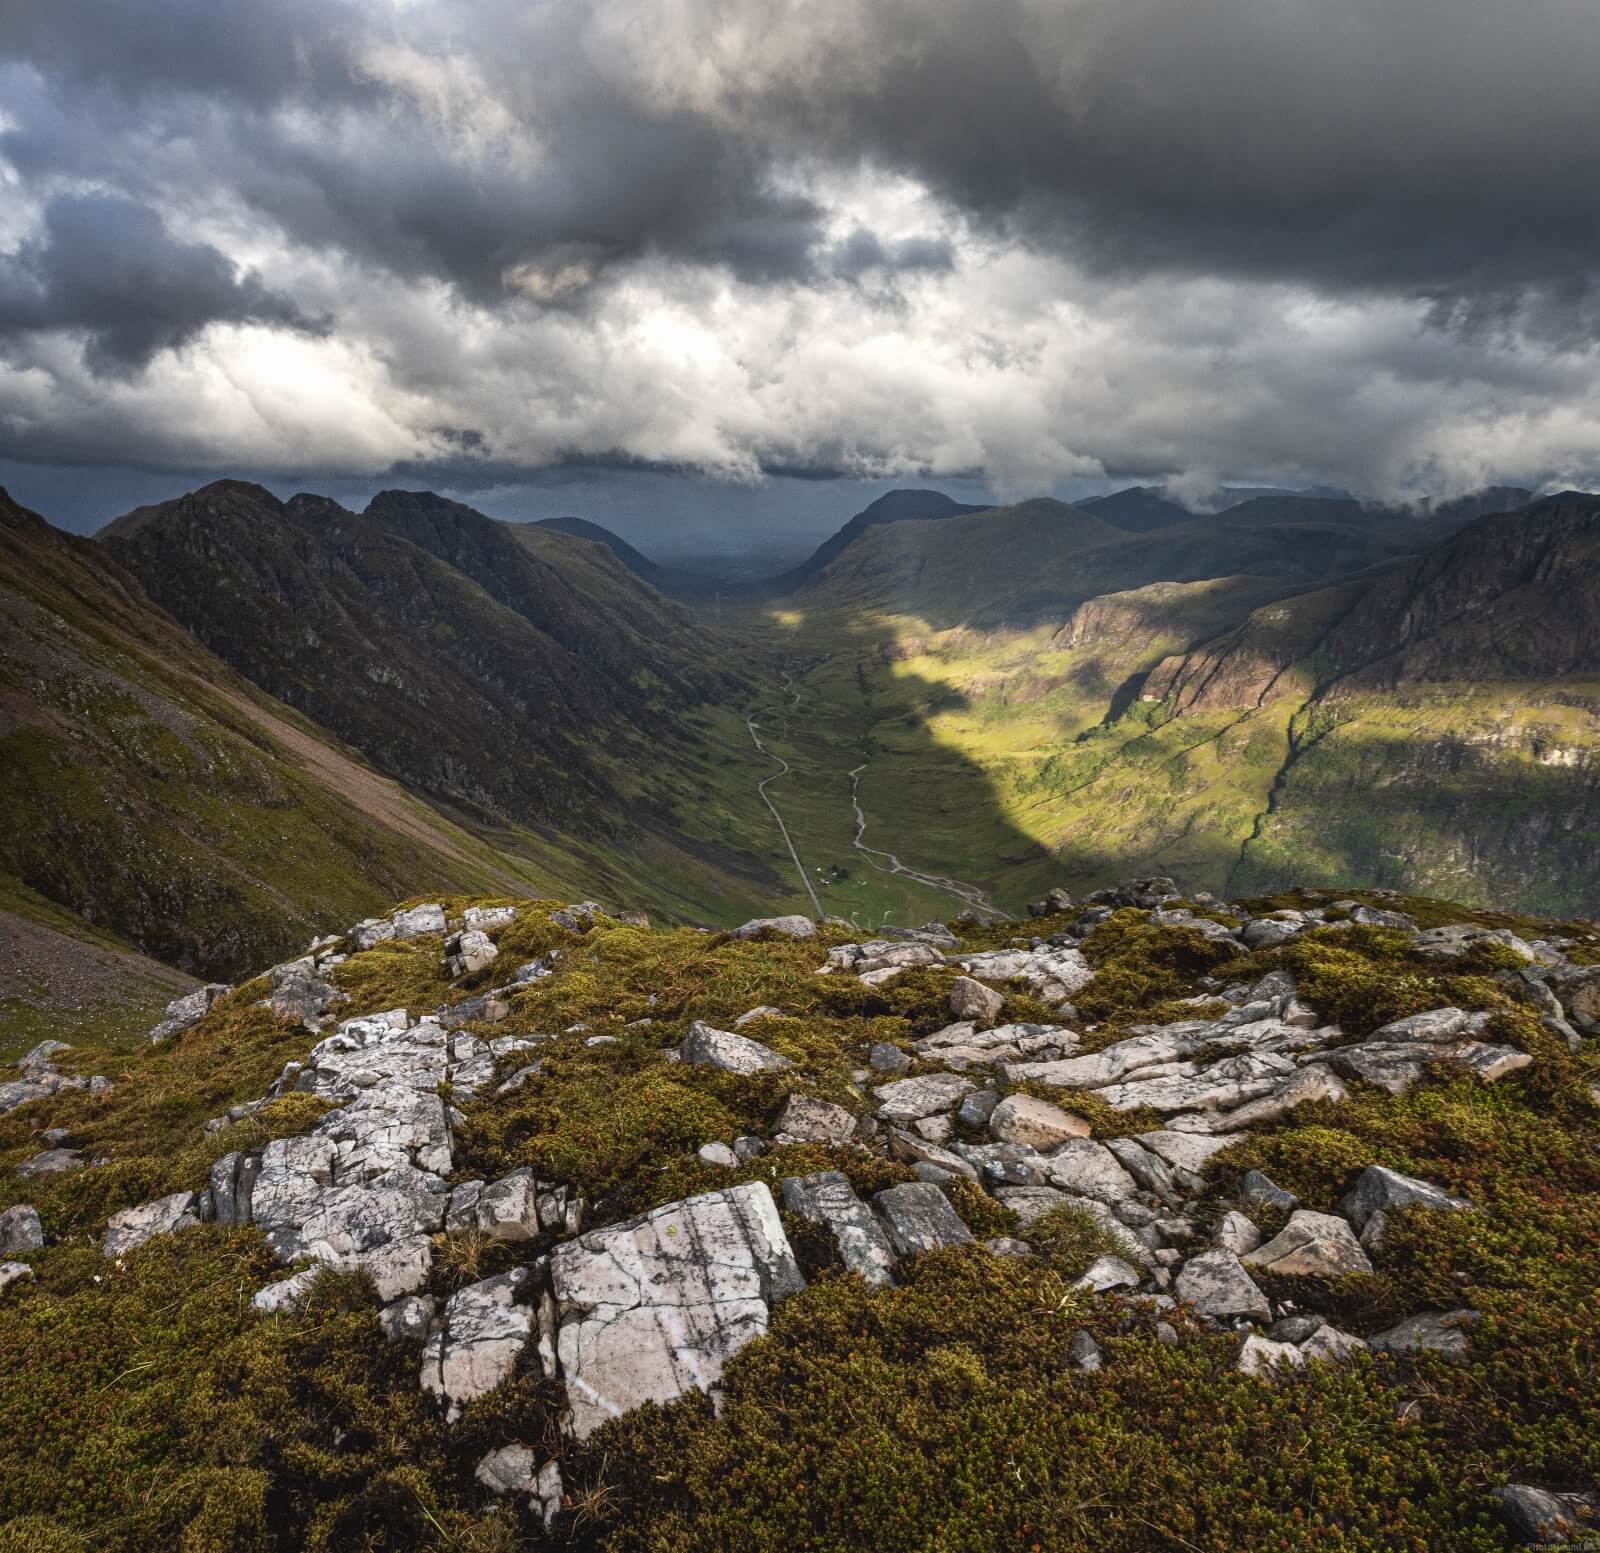 Image of Coire an t-Sidhein by Matt Holland